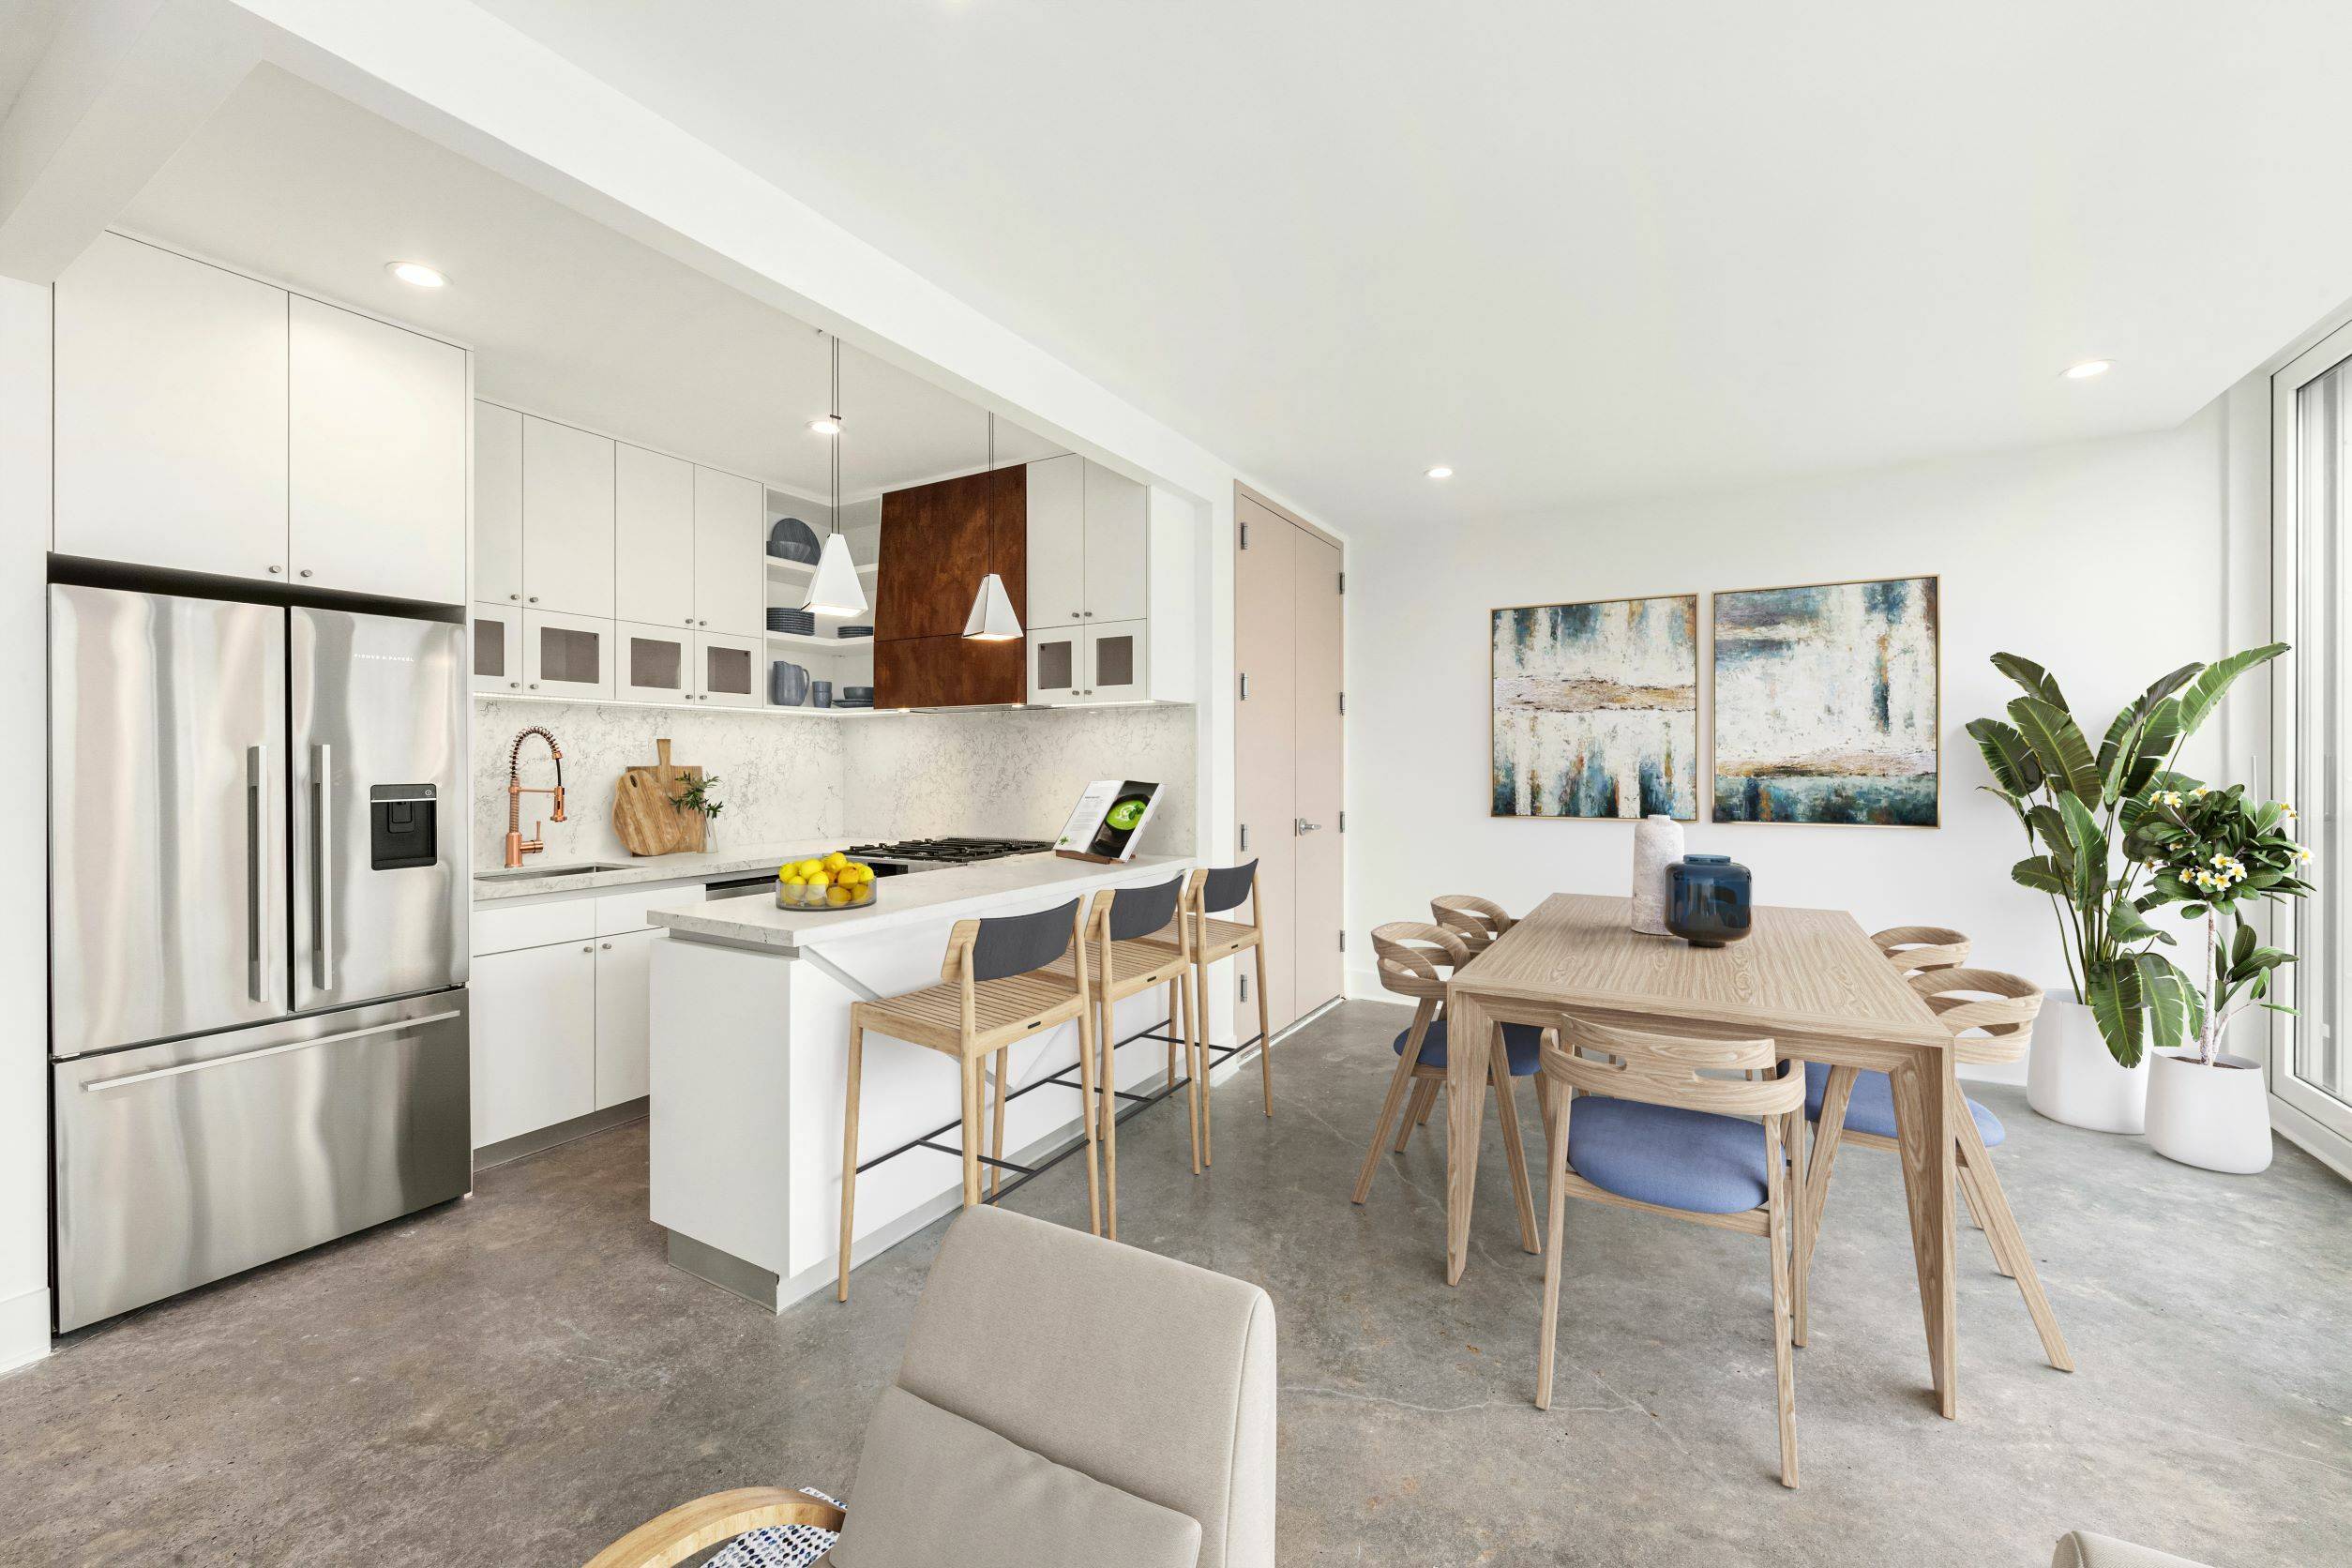 Introducing this brand new Bushwick condominium suffused with natural light, a chic 3 bedroom, 2 bathroom floor through home graced with statement finishes that exude luxury and style.